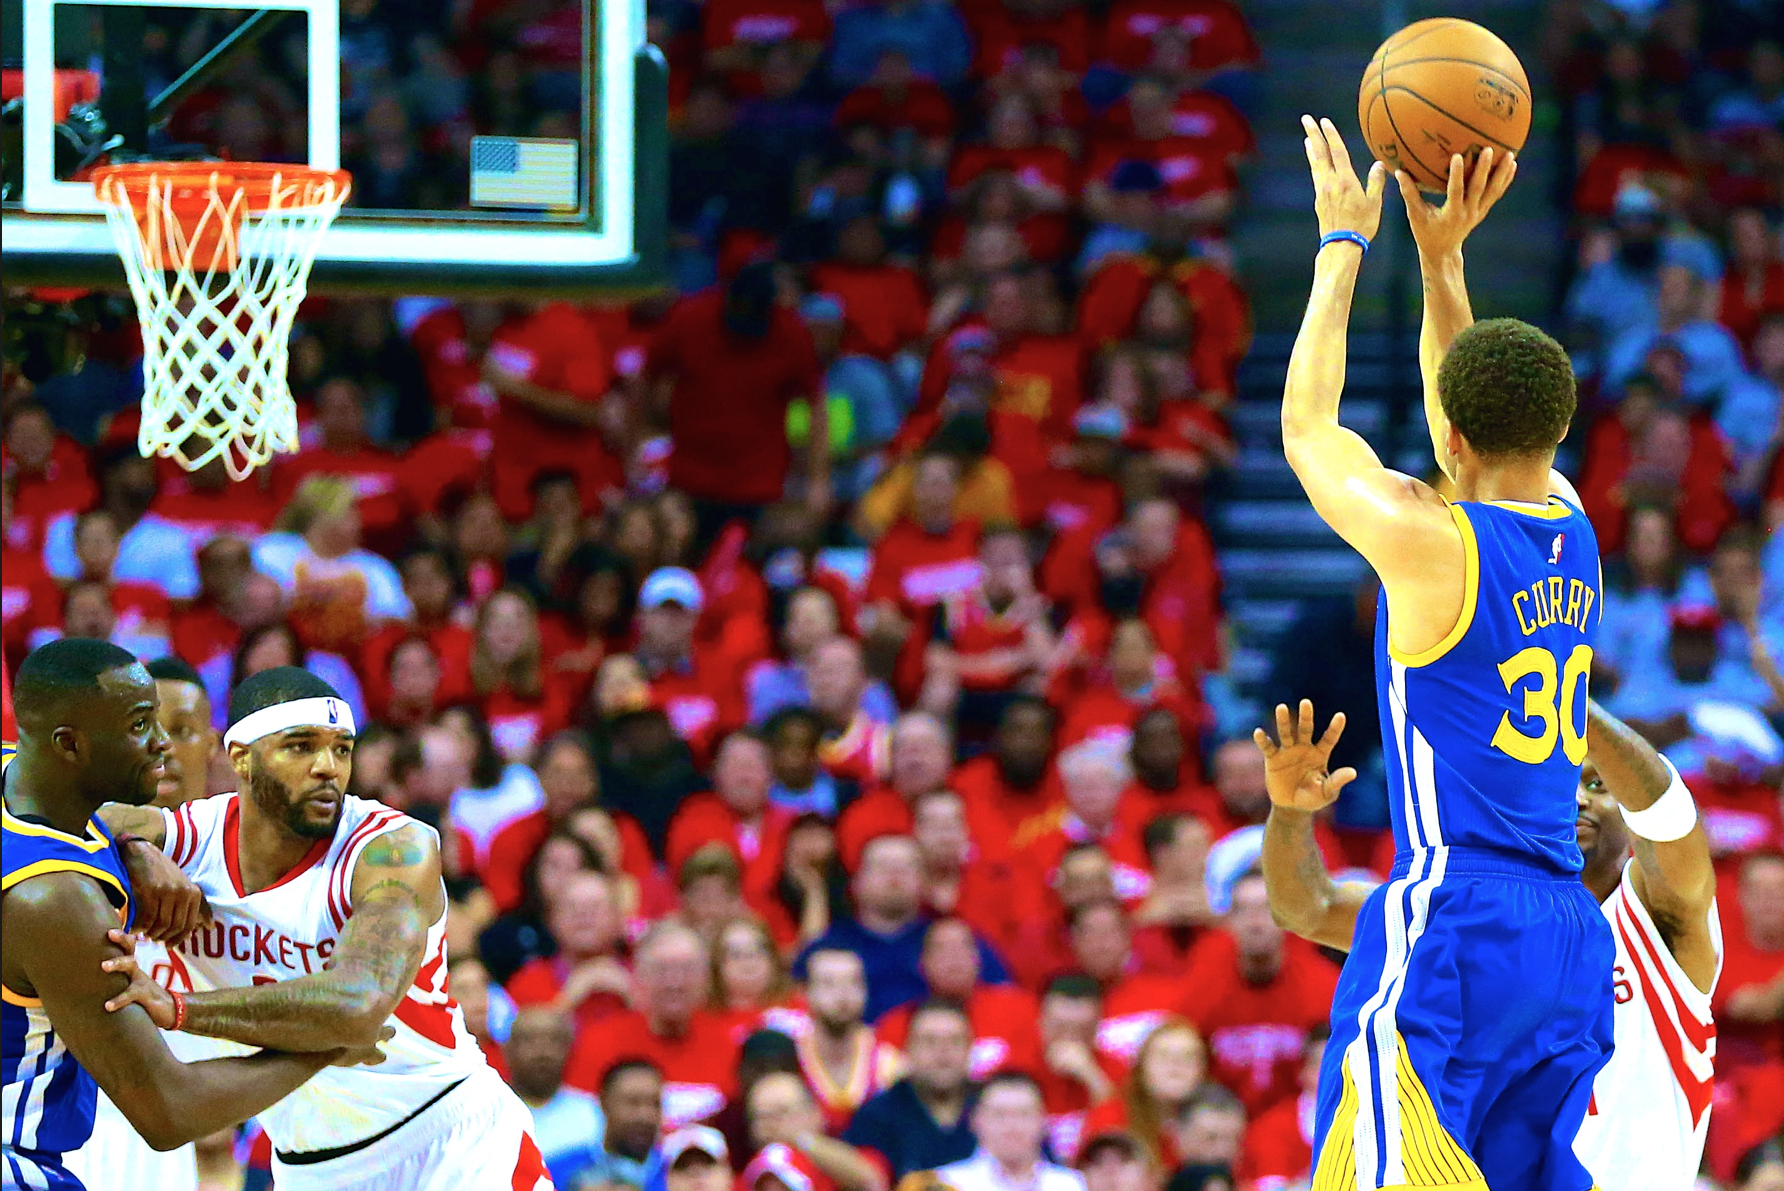 Top 5 3-point shooting games of Stephen Curry's career